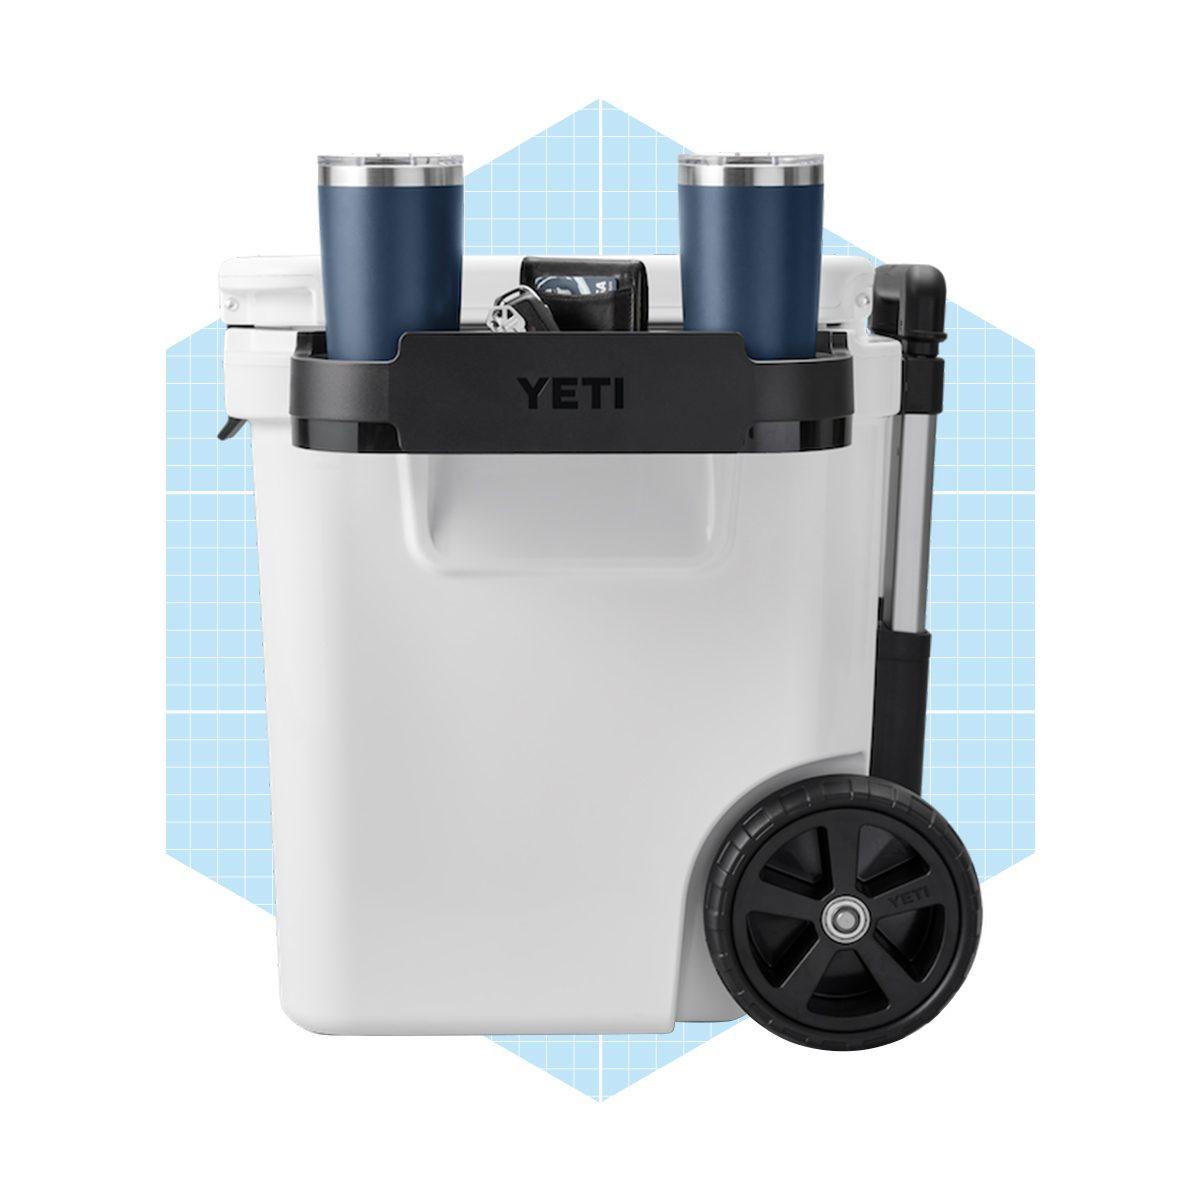 5 Best Yeti Cooler Accessories [Comprehensive Review]